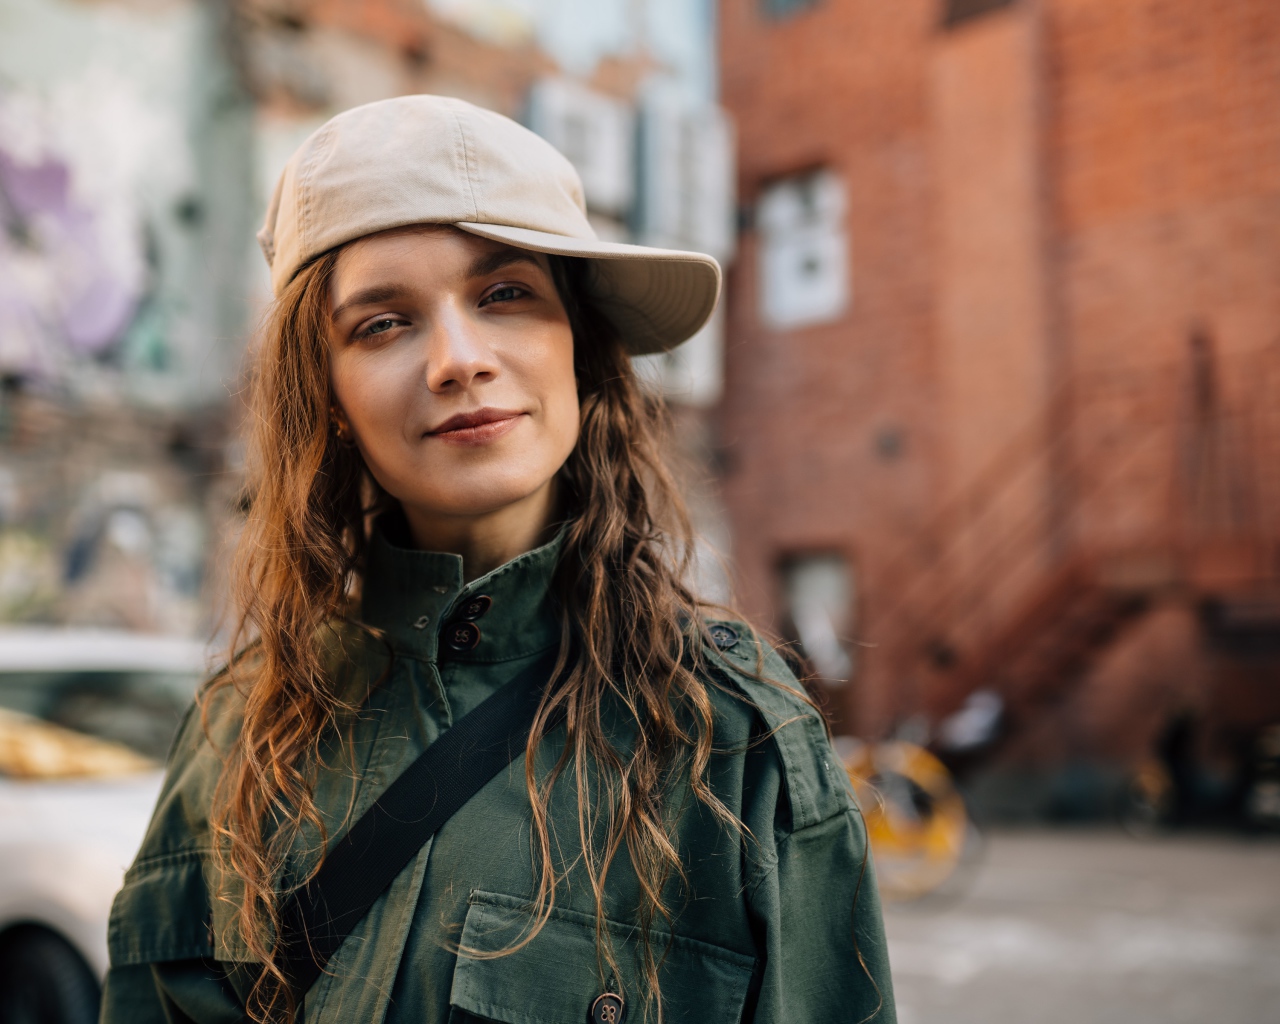 Young fashionable girl in a cap in the city